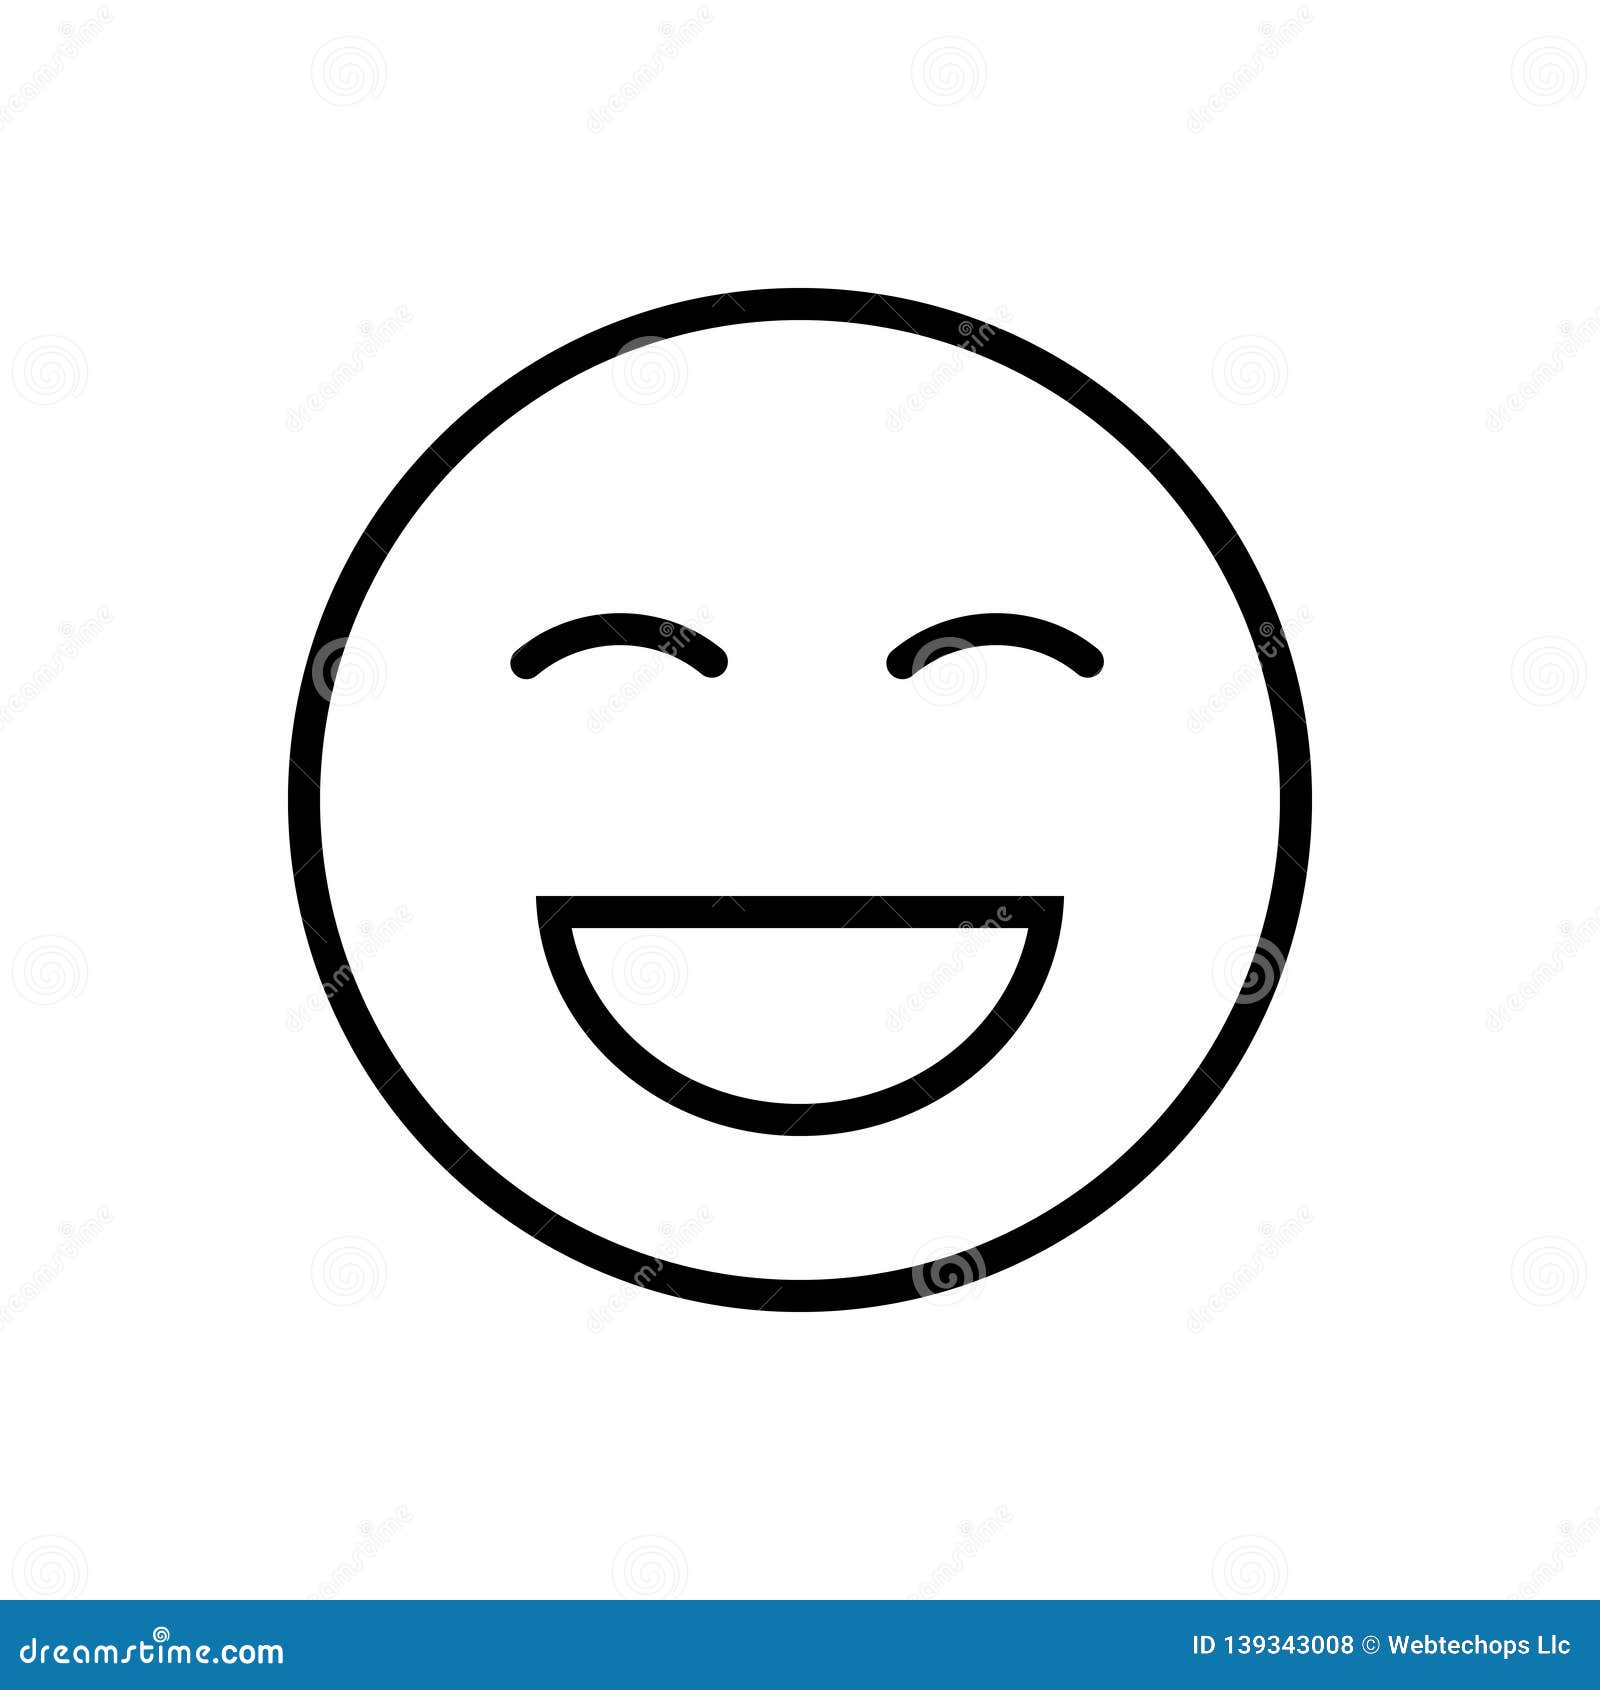 black line icon for laugh, laughter and emotion